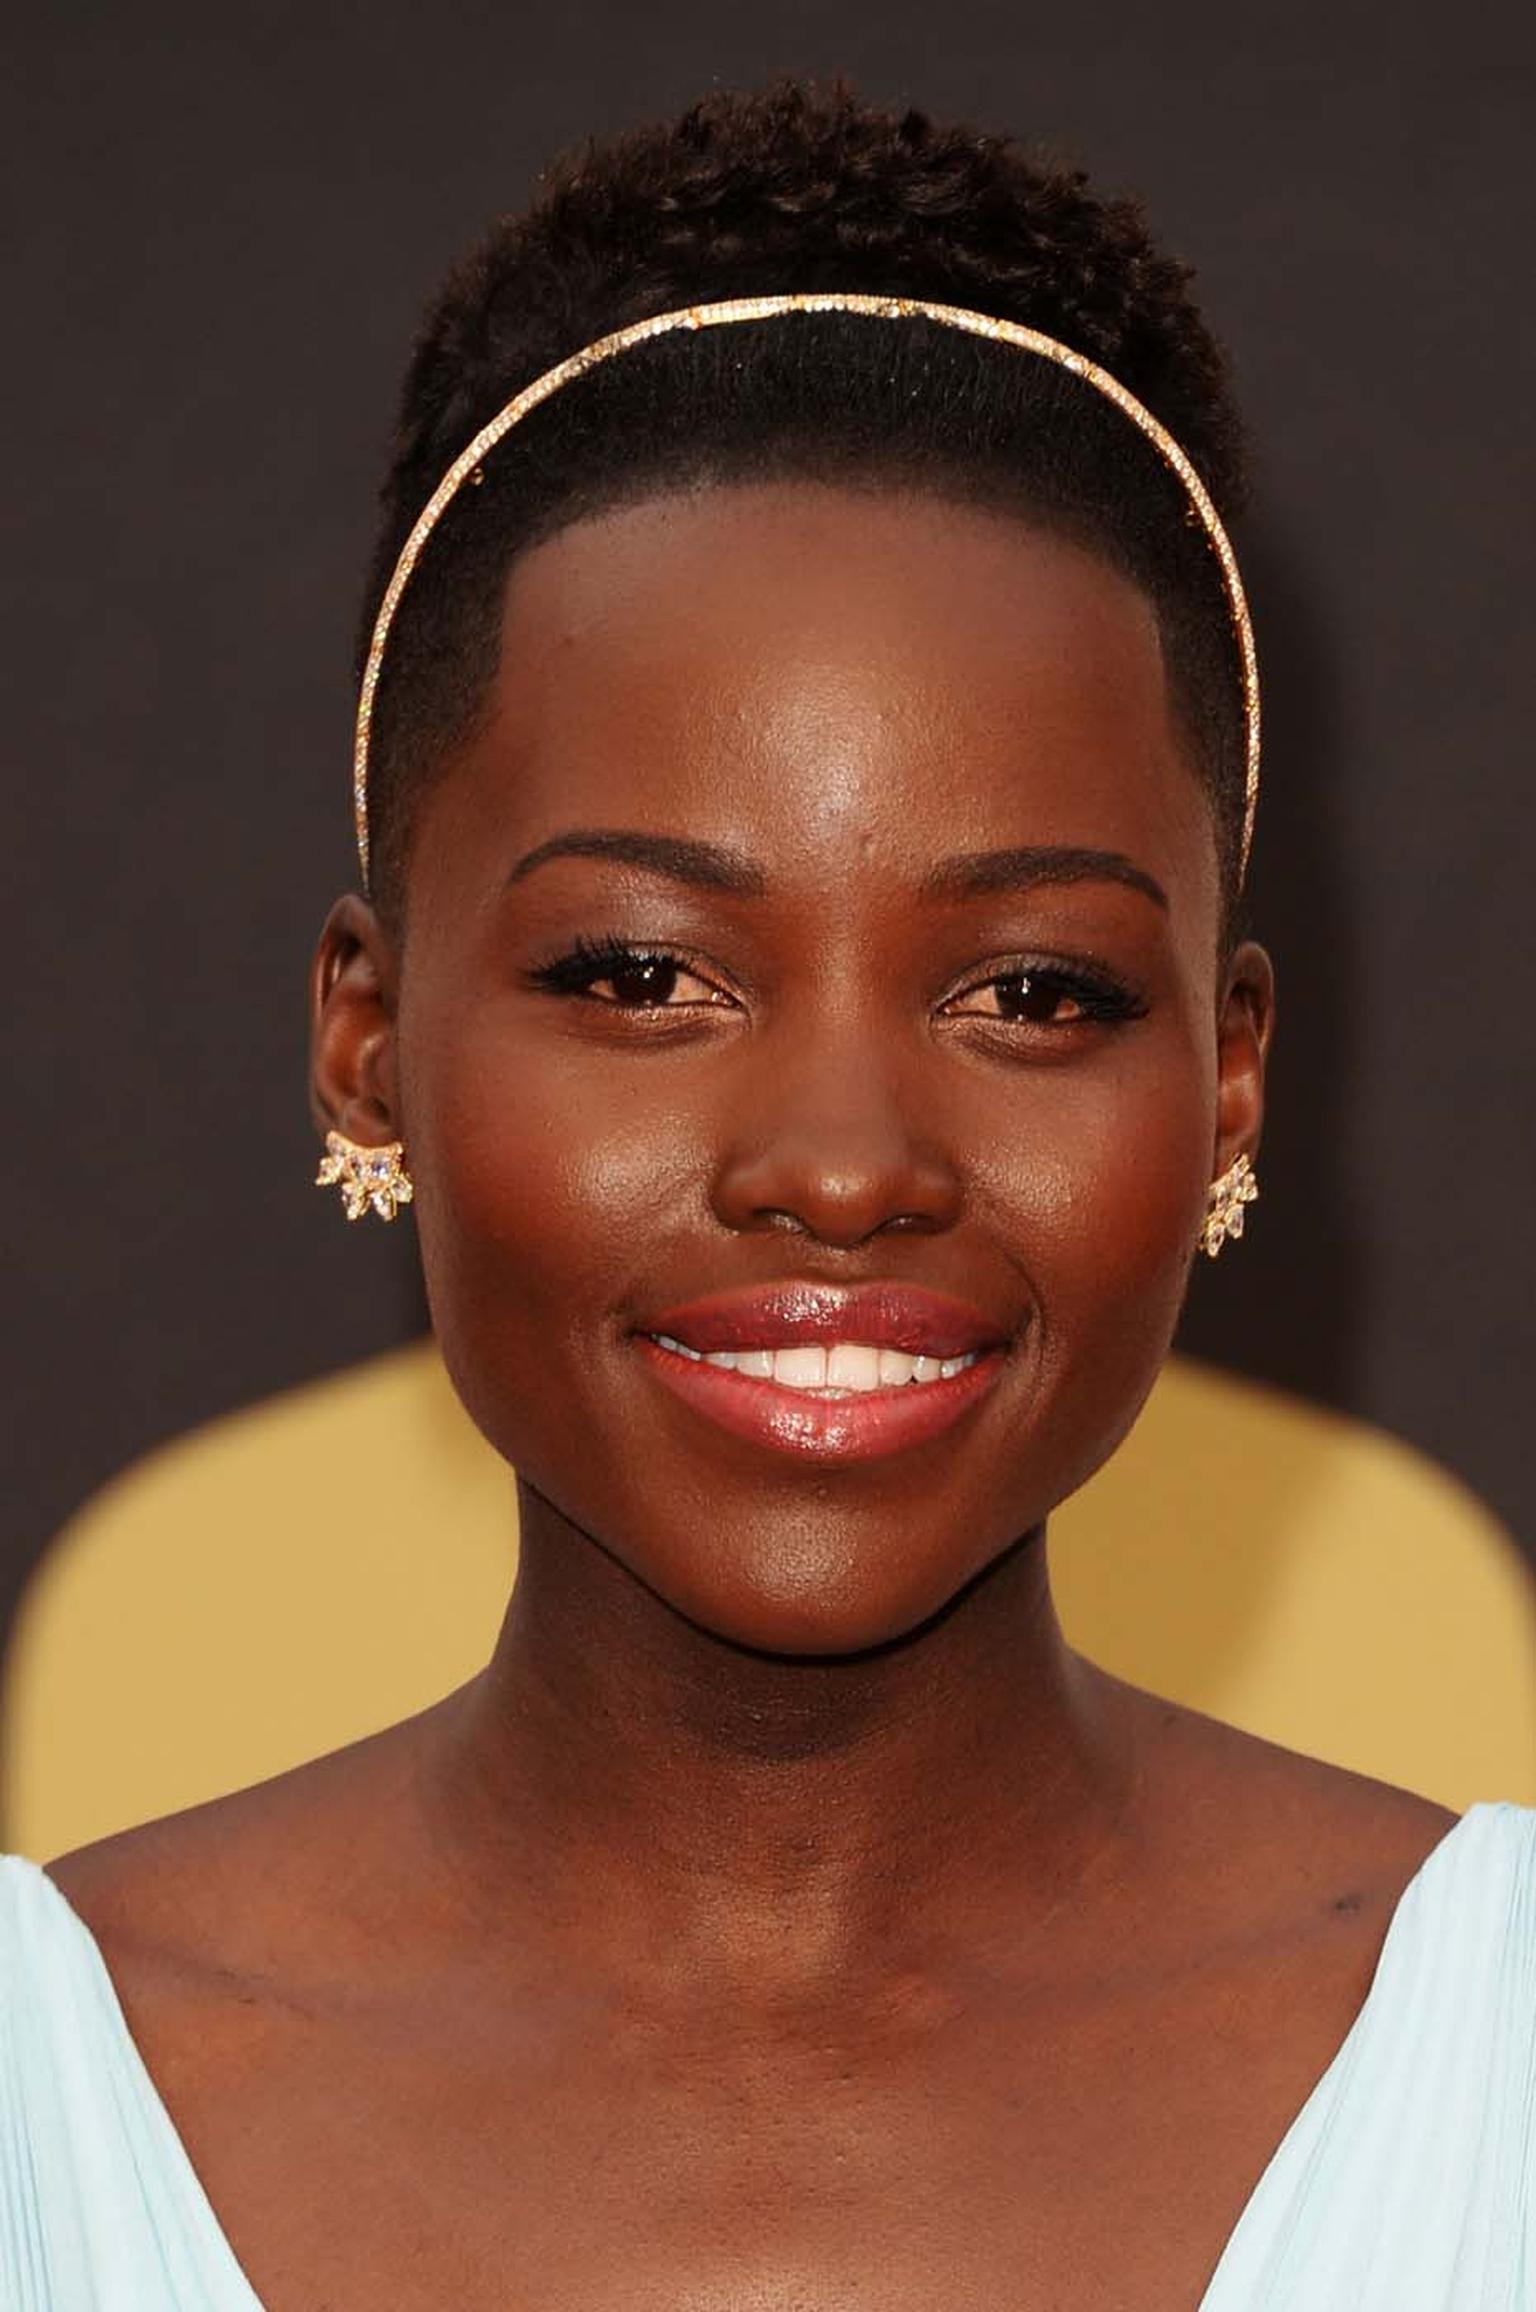 At the 2014 Oscars, actress Lupita Nyong'o wore a pair of crescent-shaped Fred Leighton earrings created by chief creative officer Rebecca Selva, with a design that was shimmery, soft and with a touch of attitude.